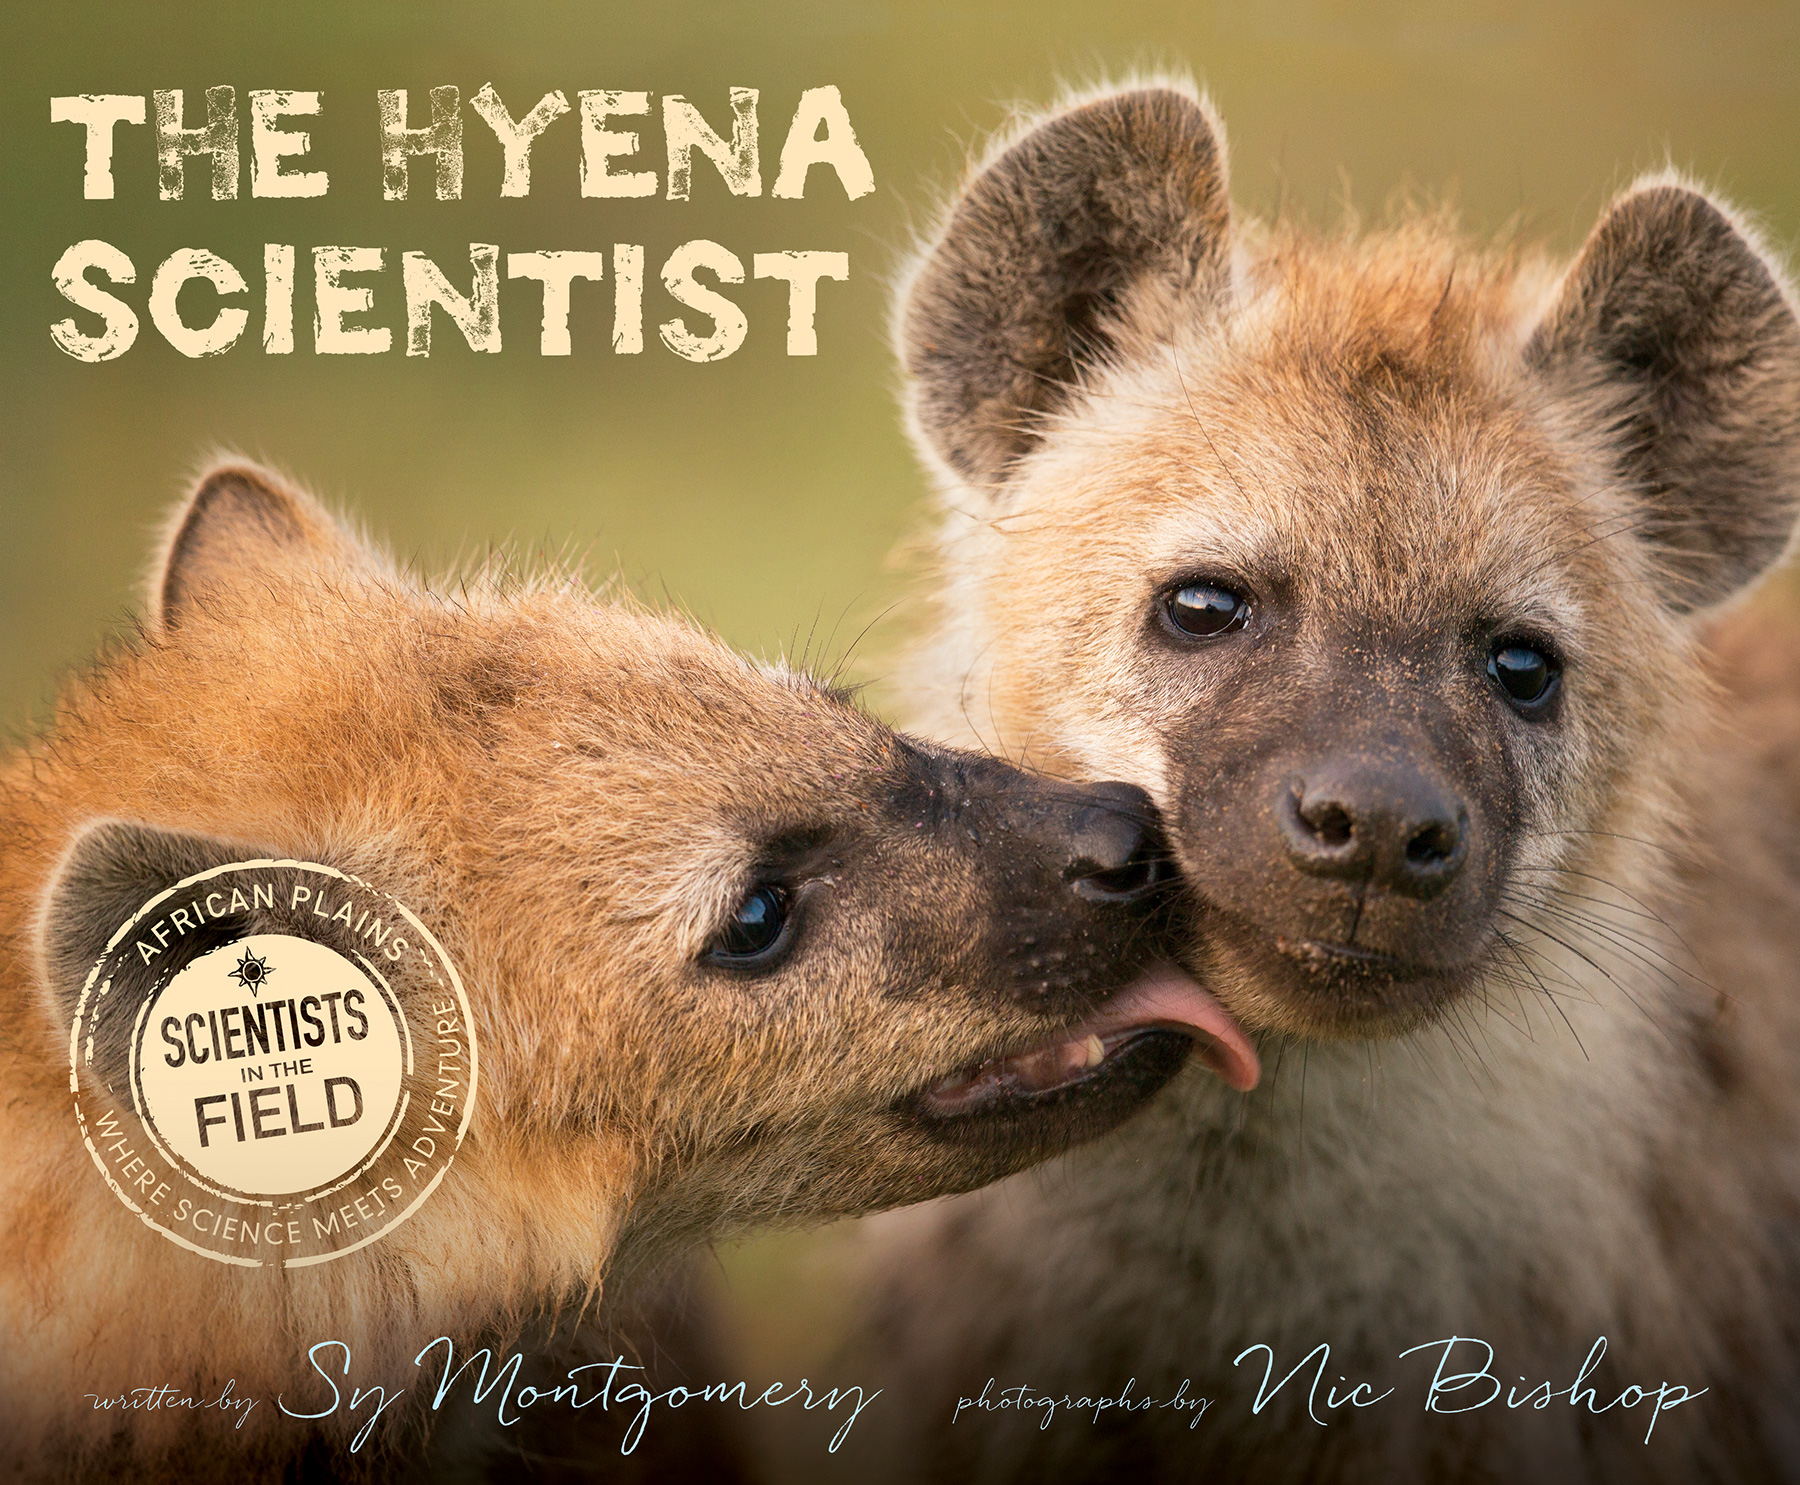 Coming in May, a new book in the Scientists in the Field series: The Hyena Scientist.